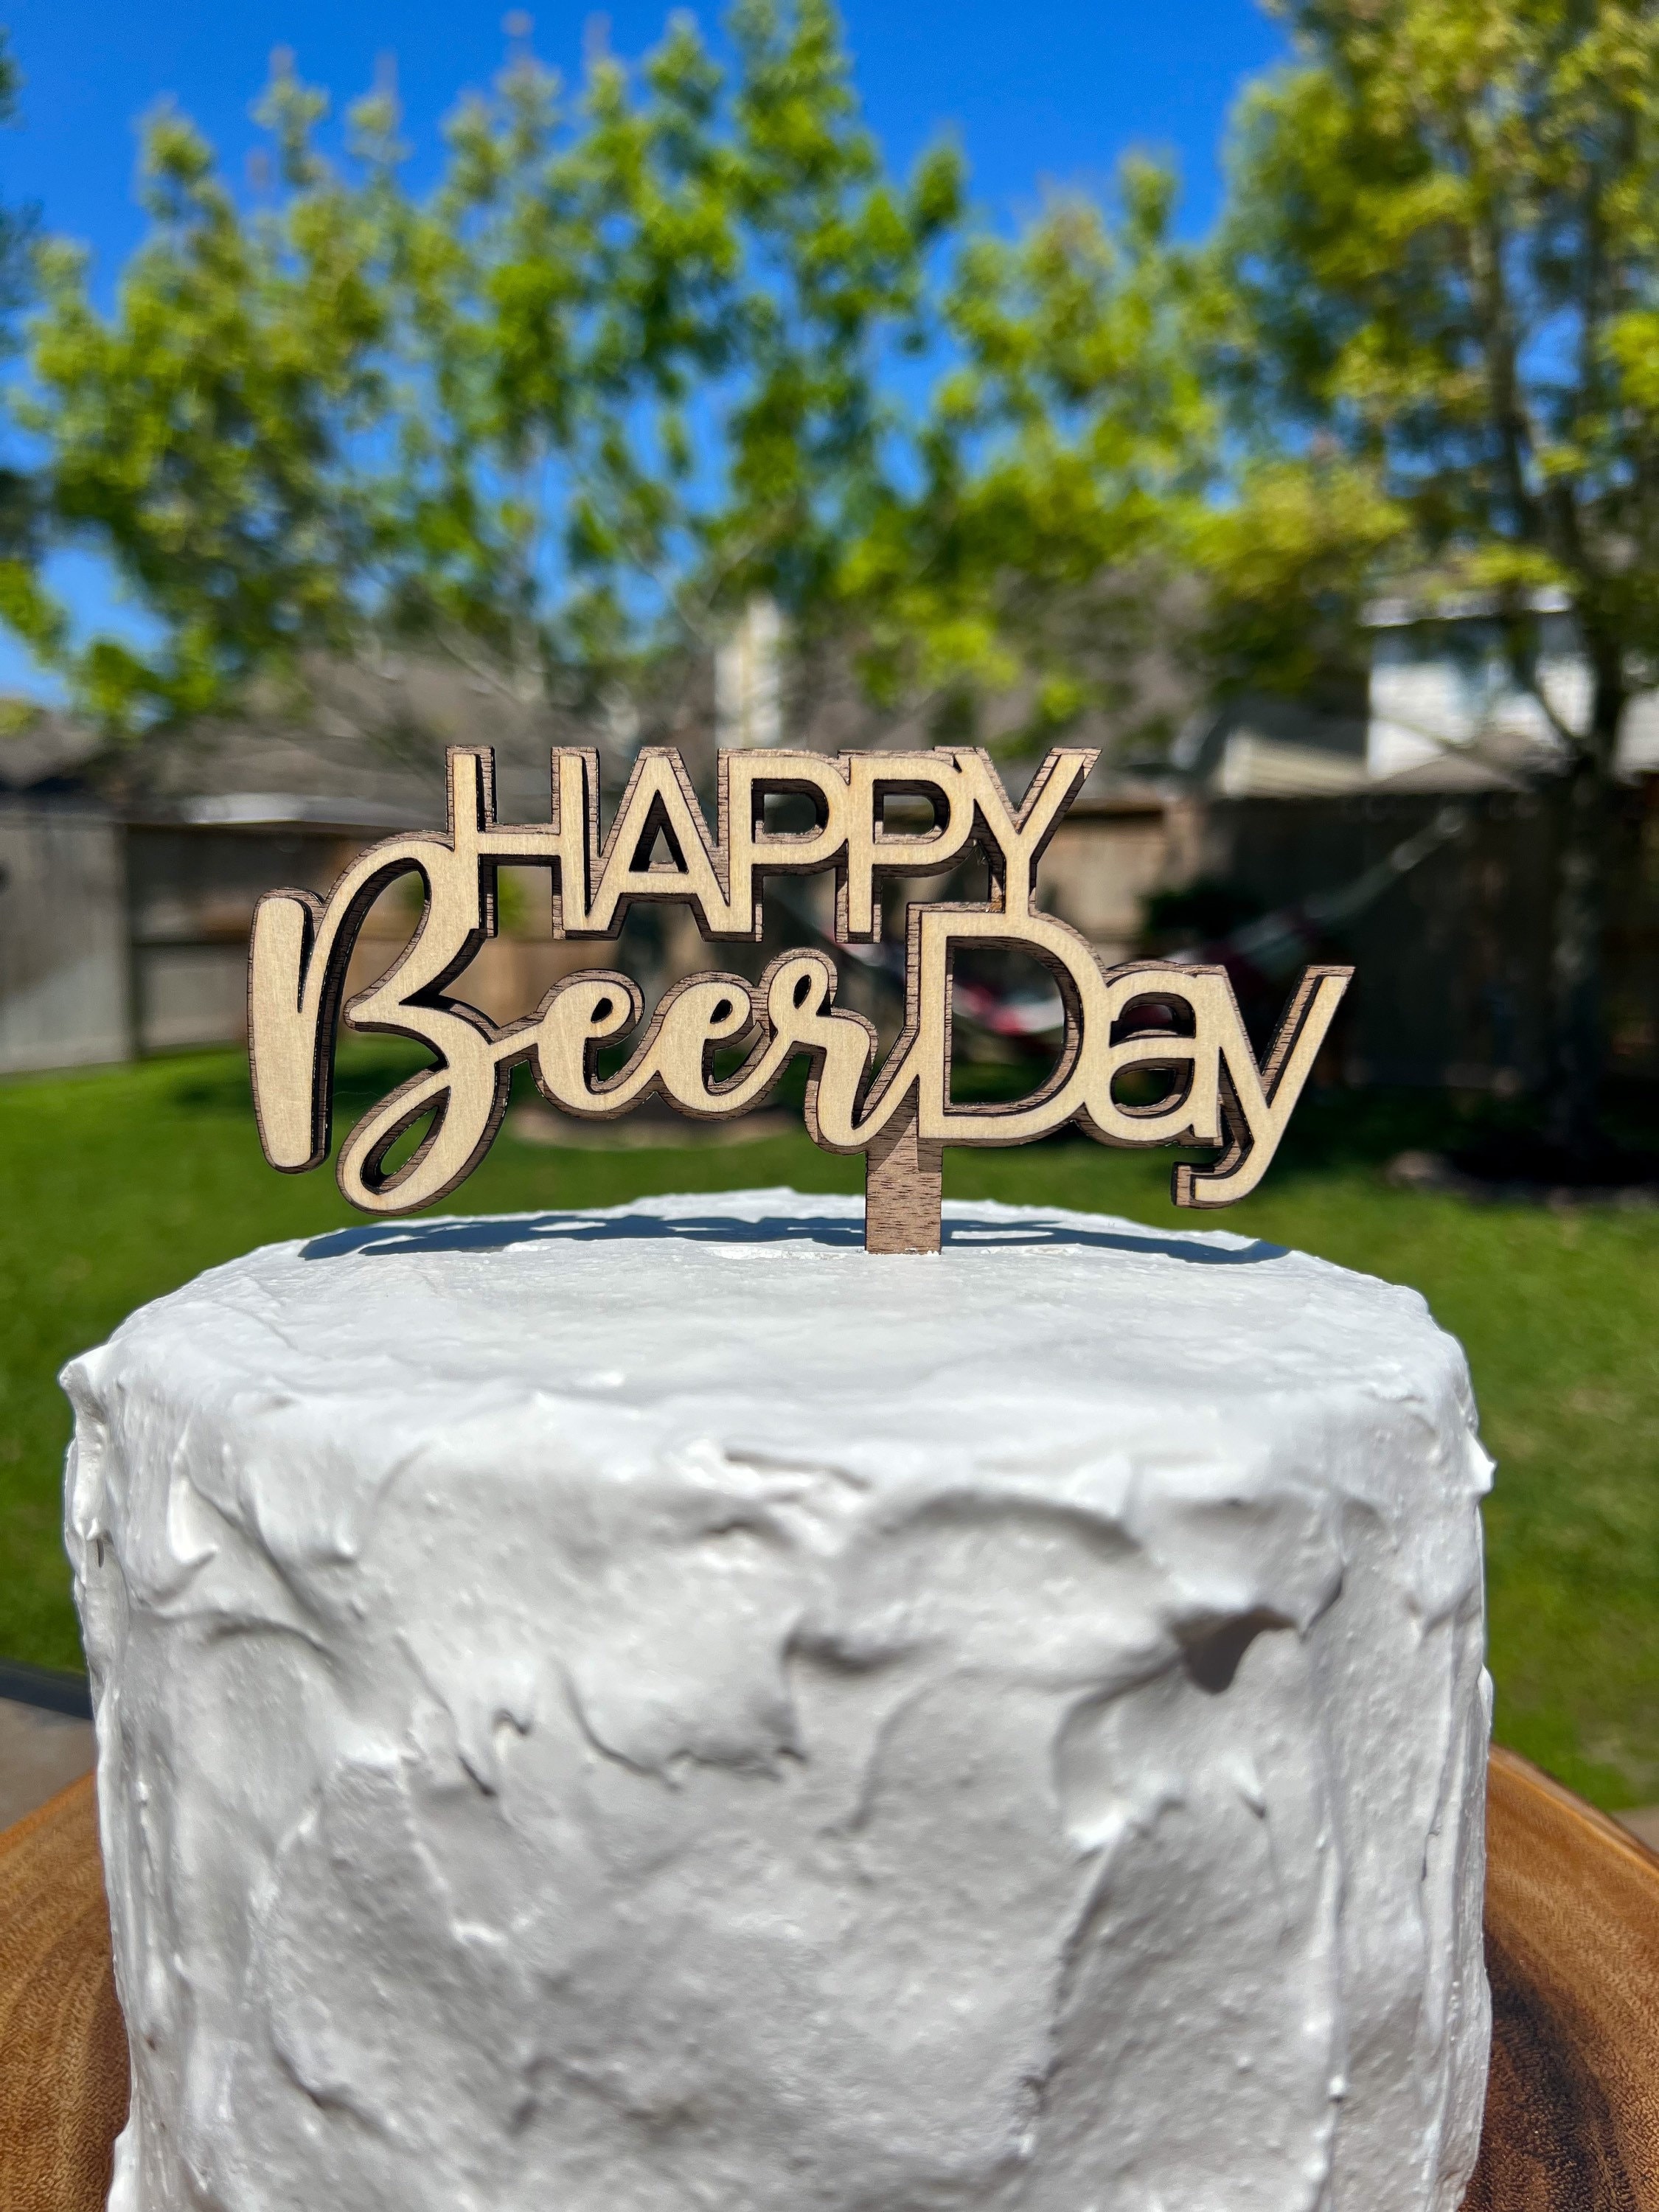 Amazon.com: Cakecery Modelo Especial Beer Edible Cake Image Topper  Personalized Birthday Cake Banner 1/4 Sheet : Grocery & Gourmet Food